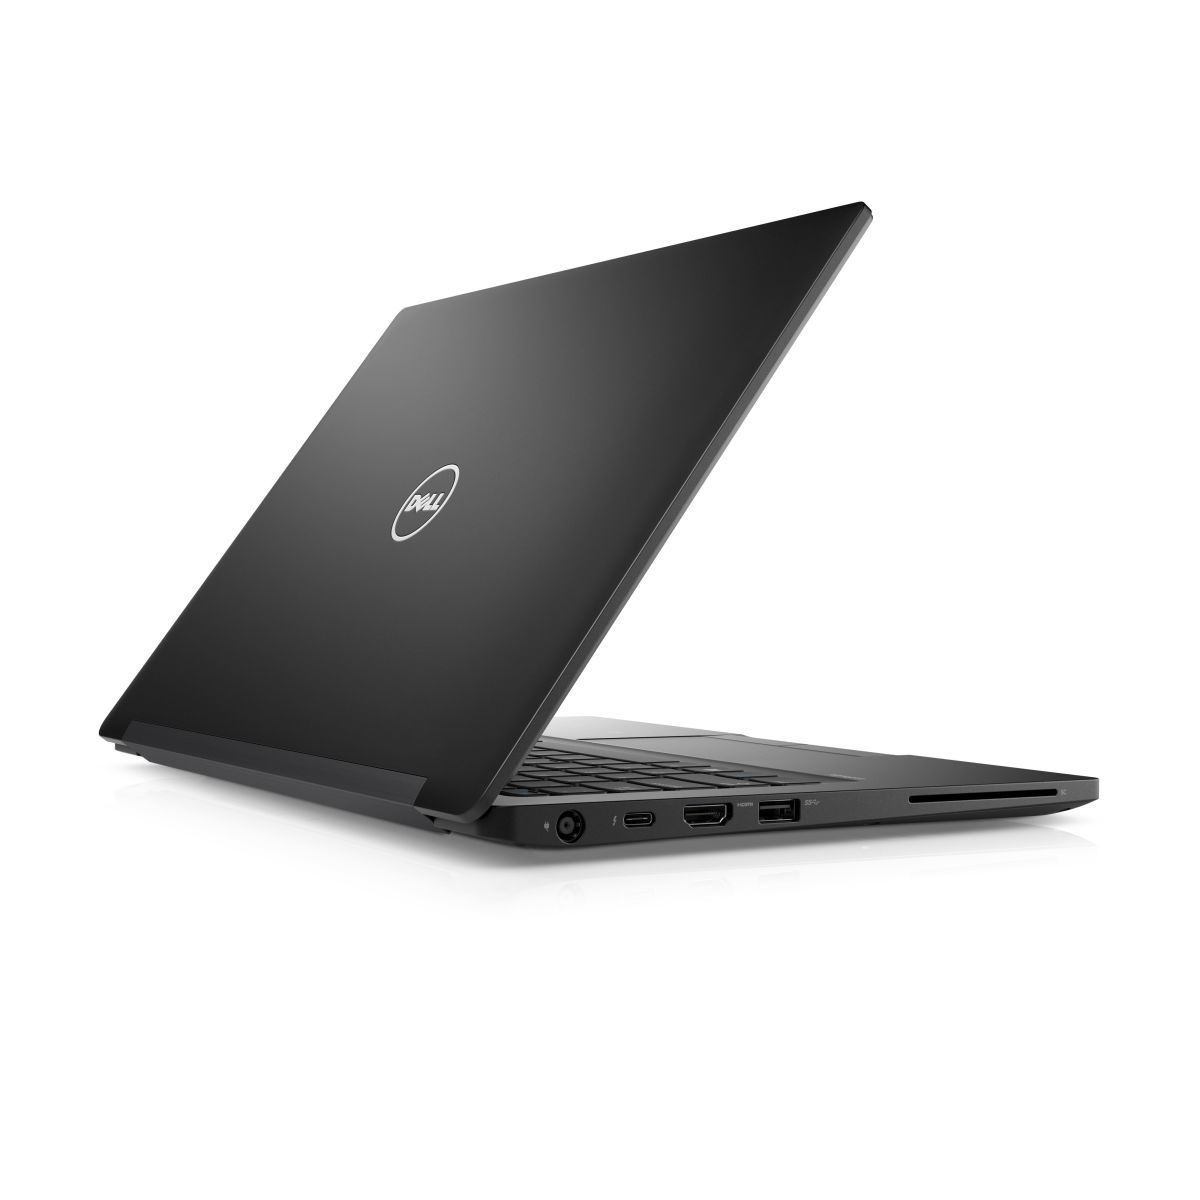 DELL Latitude 7290 - RNNP4 laptop specifications